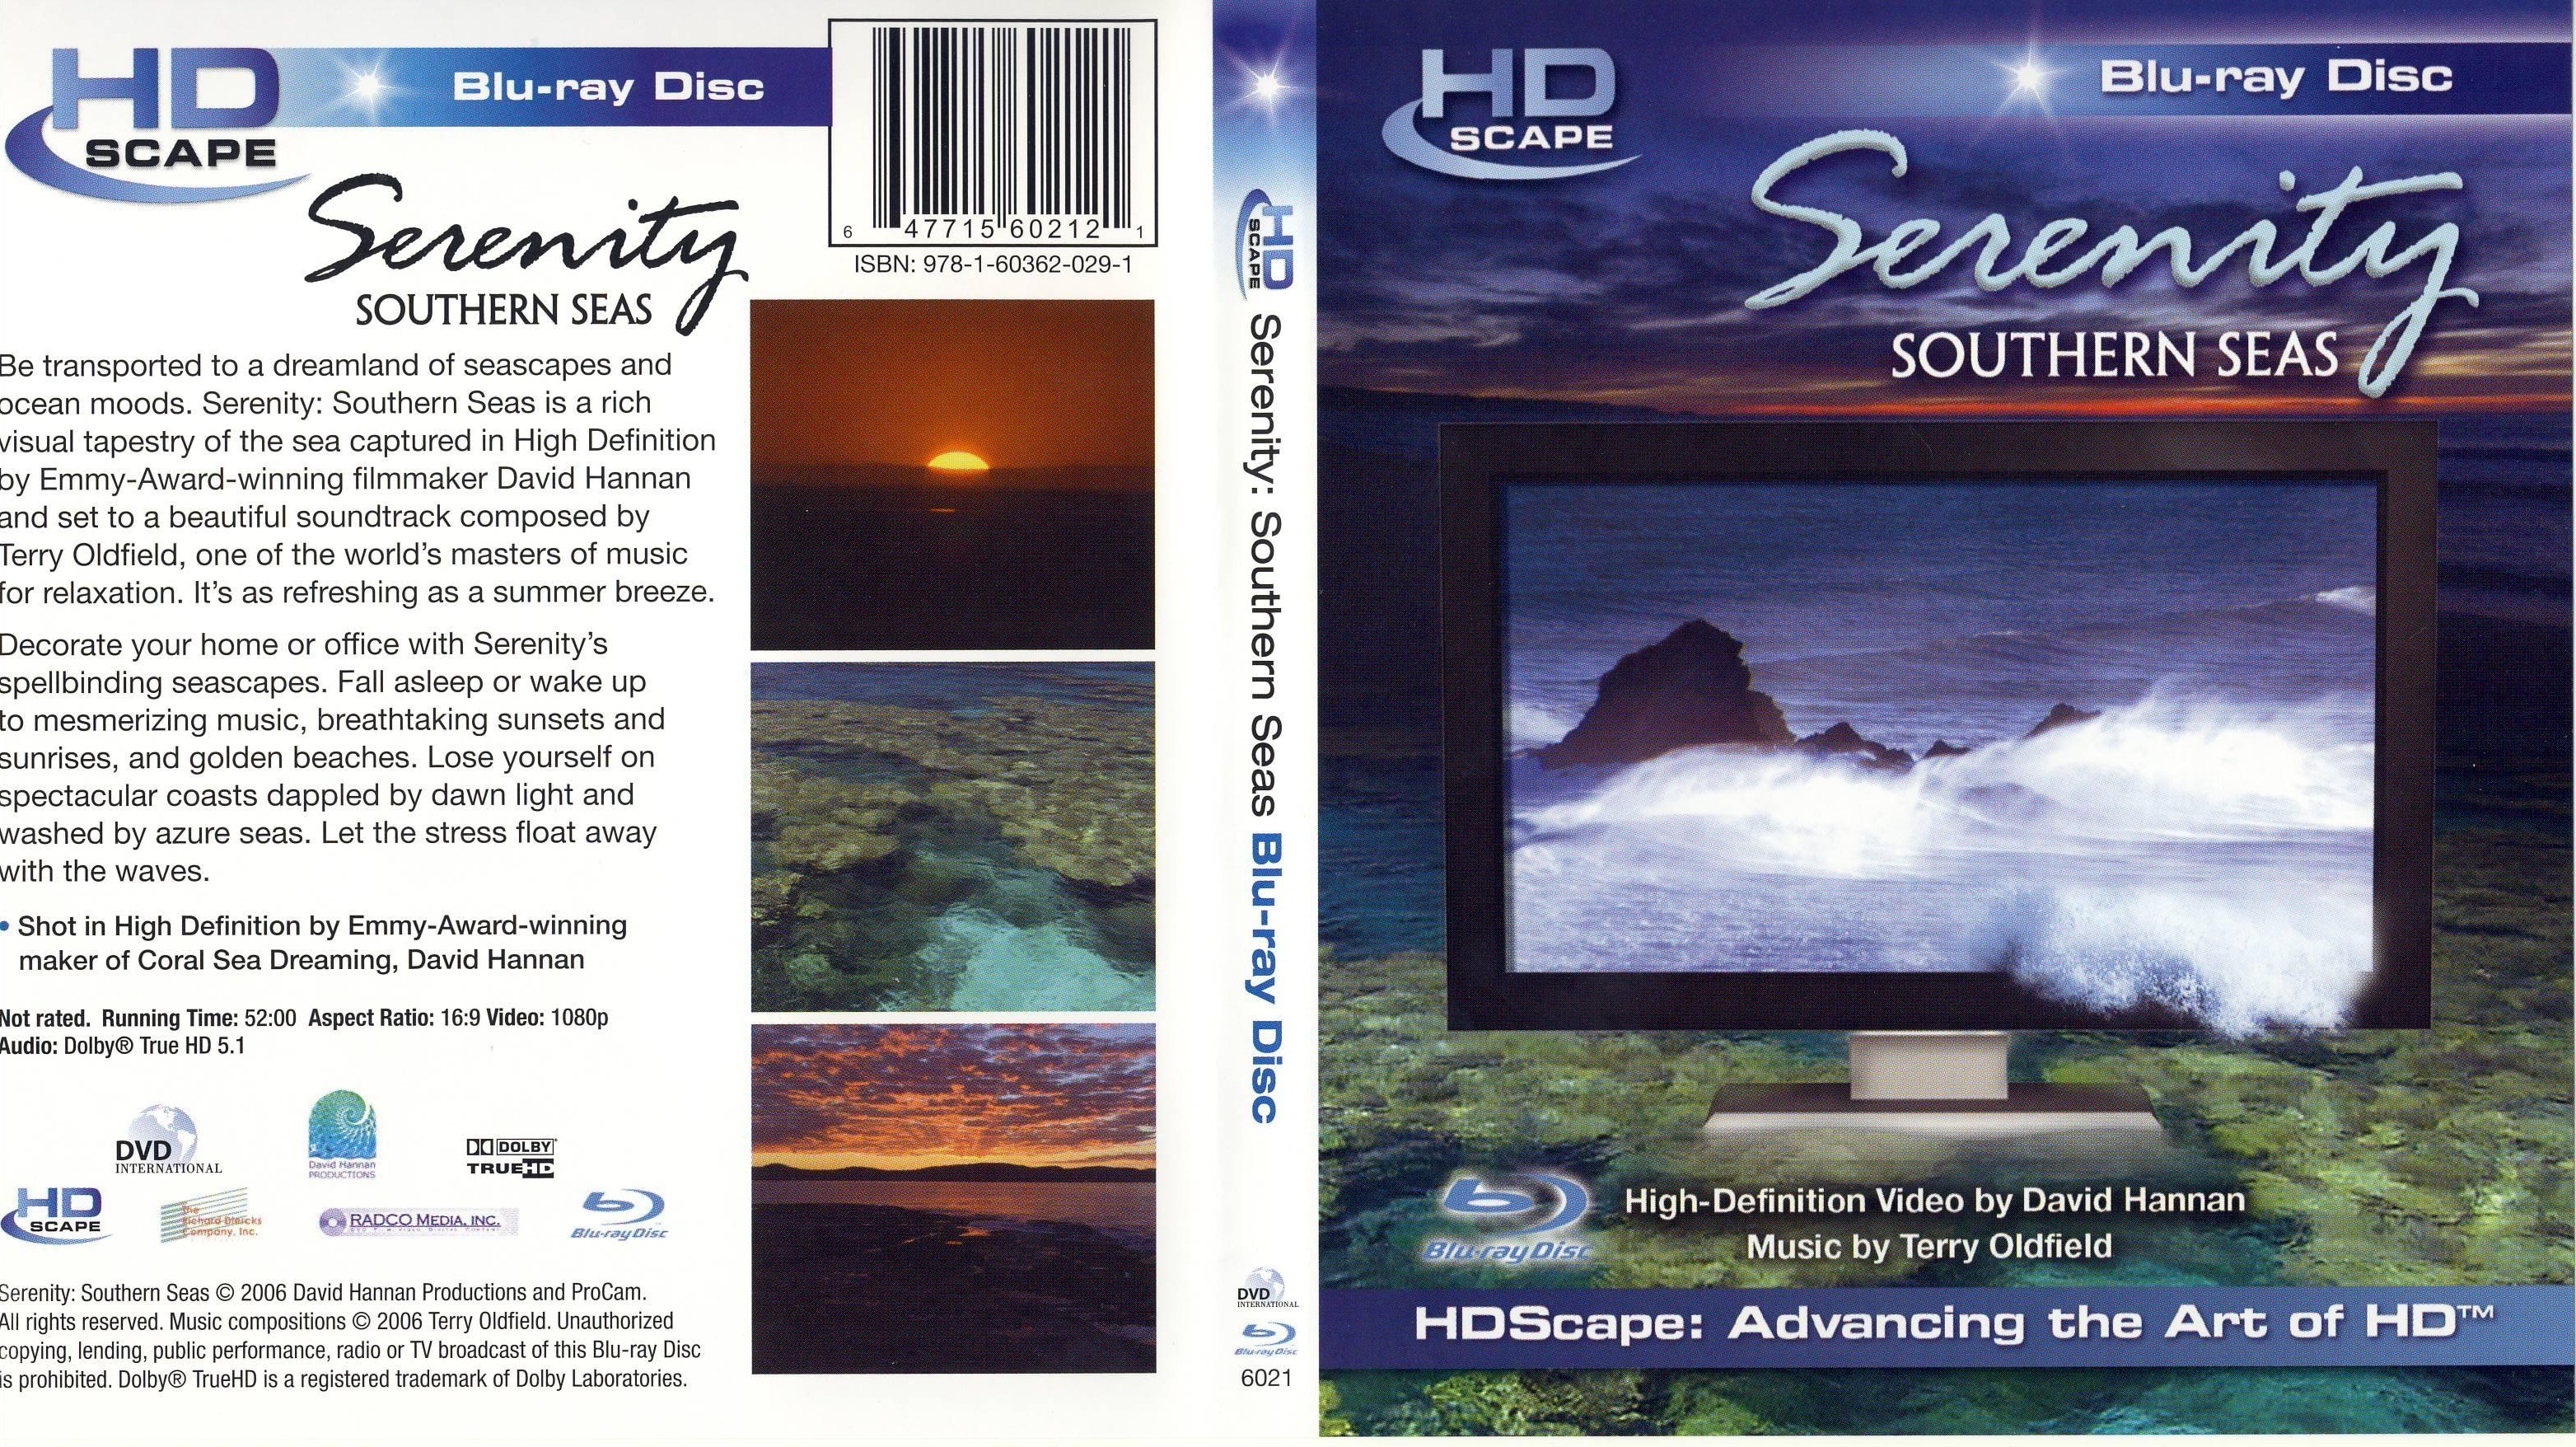 Jaquette DVD Serenity Southern Seas Zone 1 (BLU-RAY)